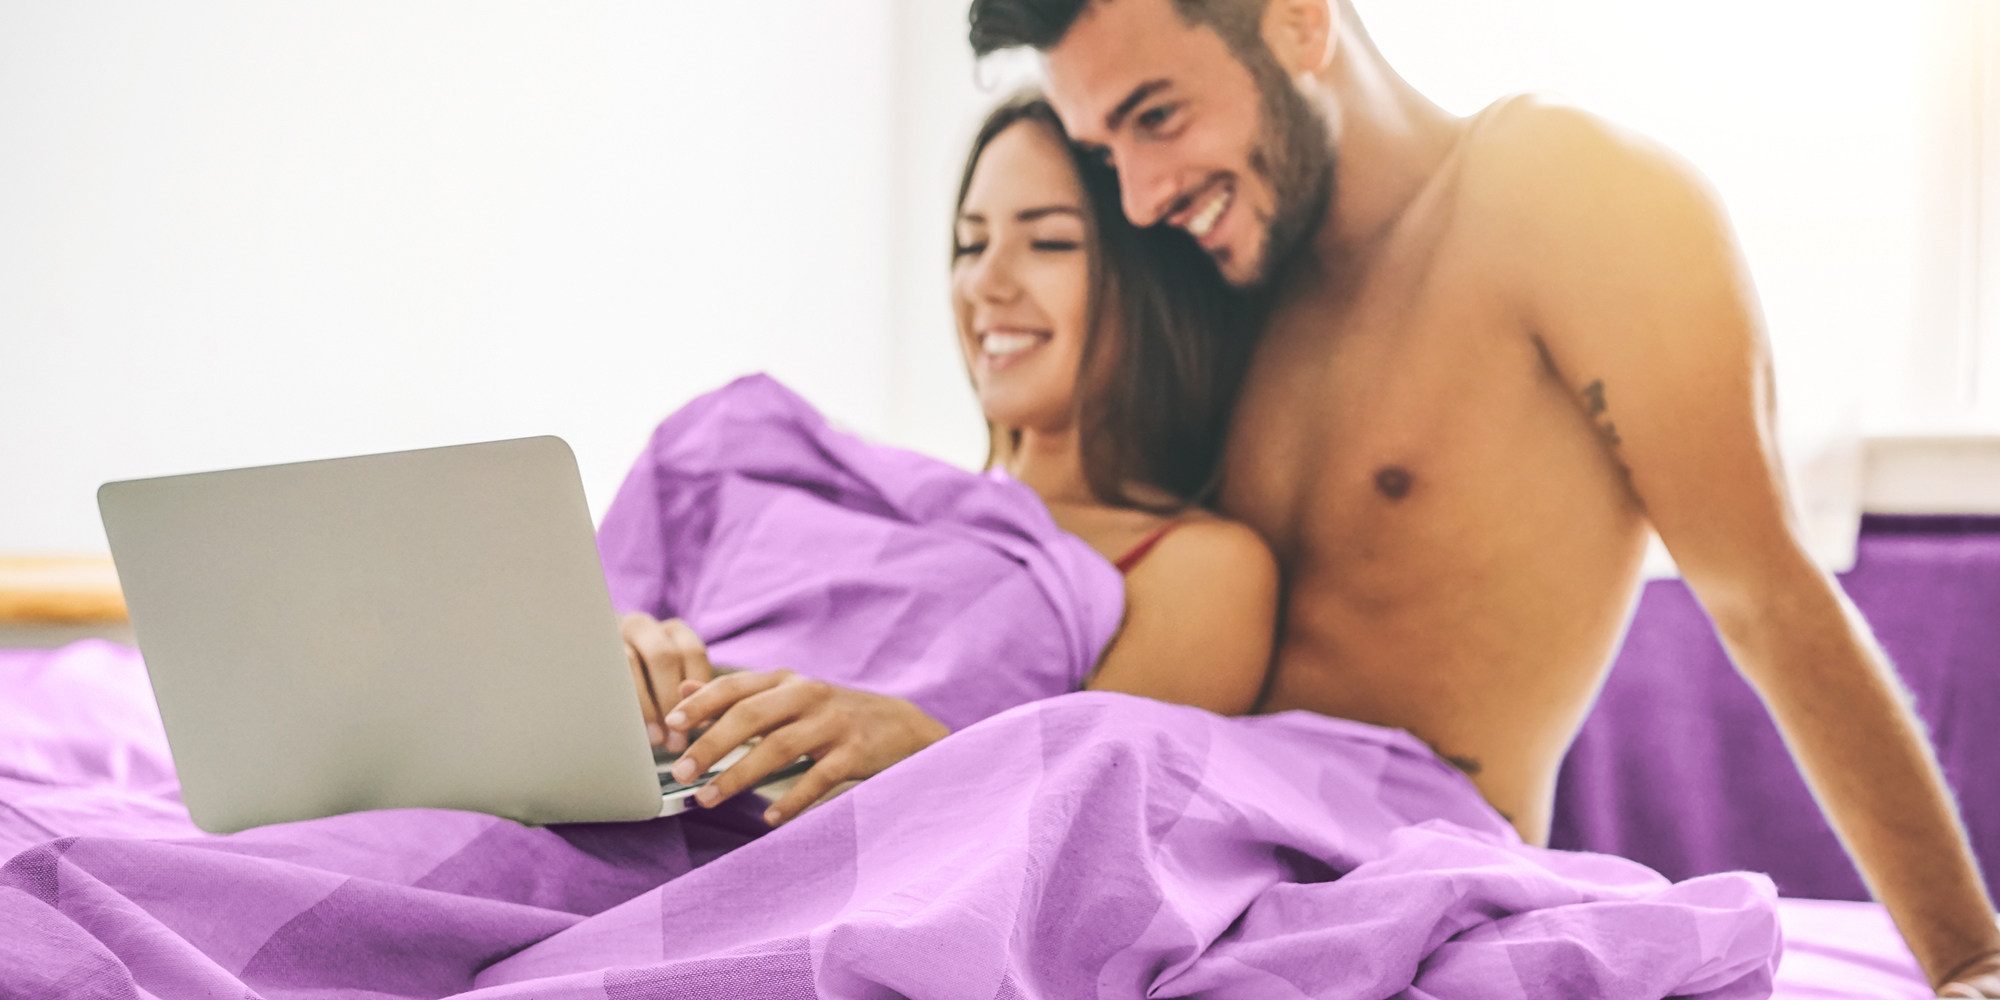 Missy Martinezs Guide To Watching Porn With Your Partner